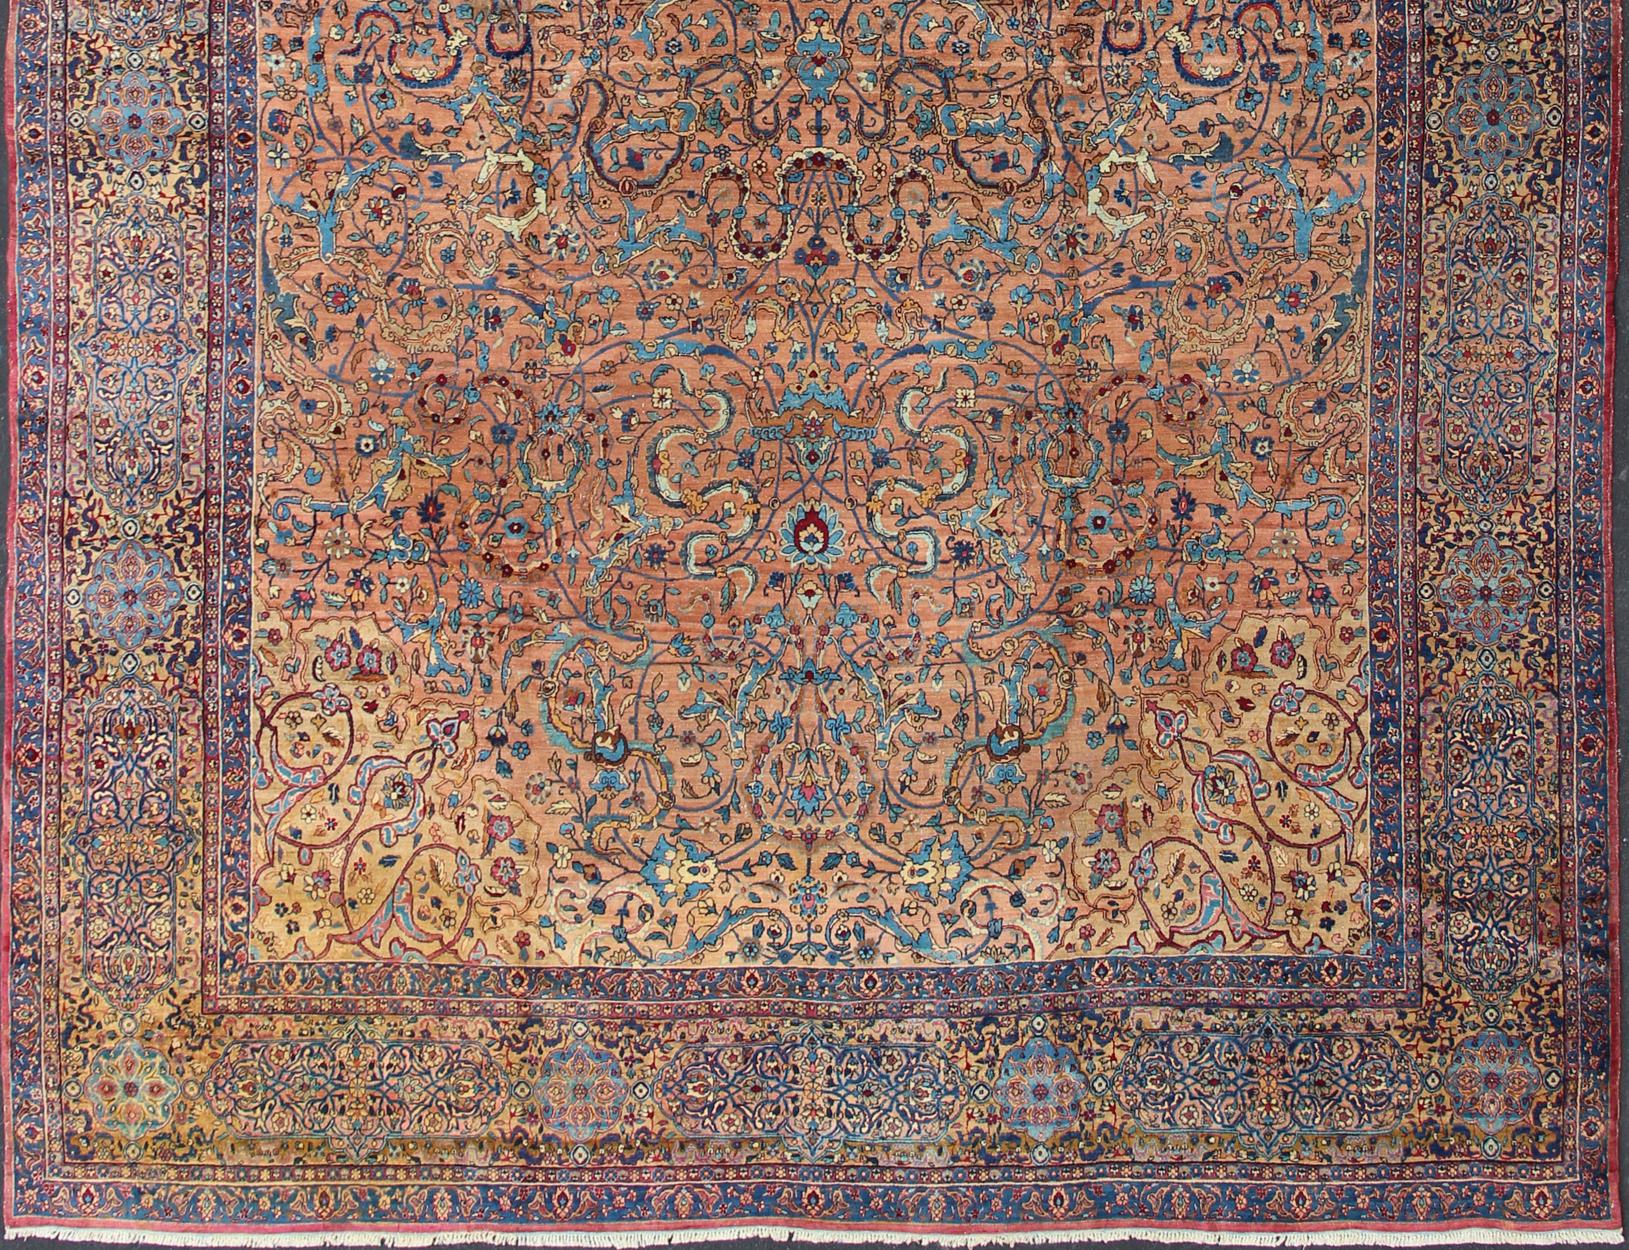 Classic Colorful Antique Large Lavar Kerman Persian Rug in Salmon Background  

Antique Lavar Kerman Rug. Keivan Woven Arts / rug S12-0903, country of origin / type: Persian / Lavar, circa Early-20th Century.

Measures 11'11 x 18'8.

This